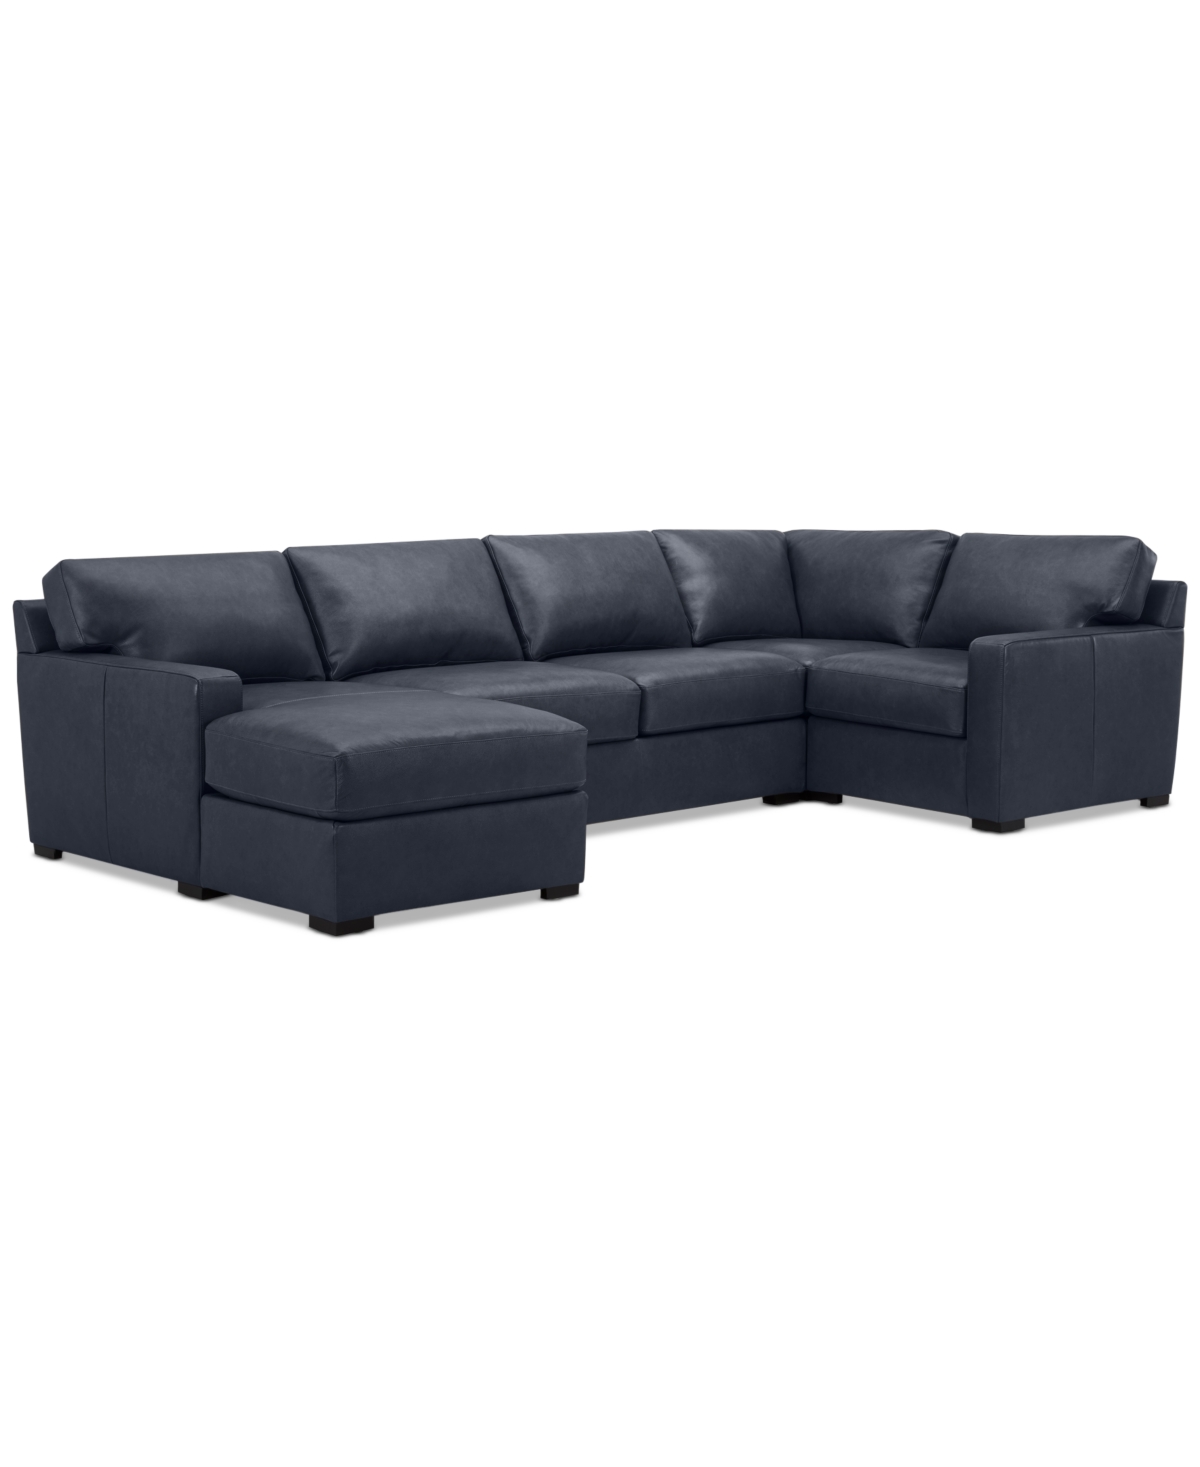 Macy's Radley 136" 4-pc. Leather Square Corner Modular Chaise Sectional, Created For  In Navy